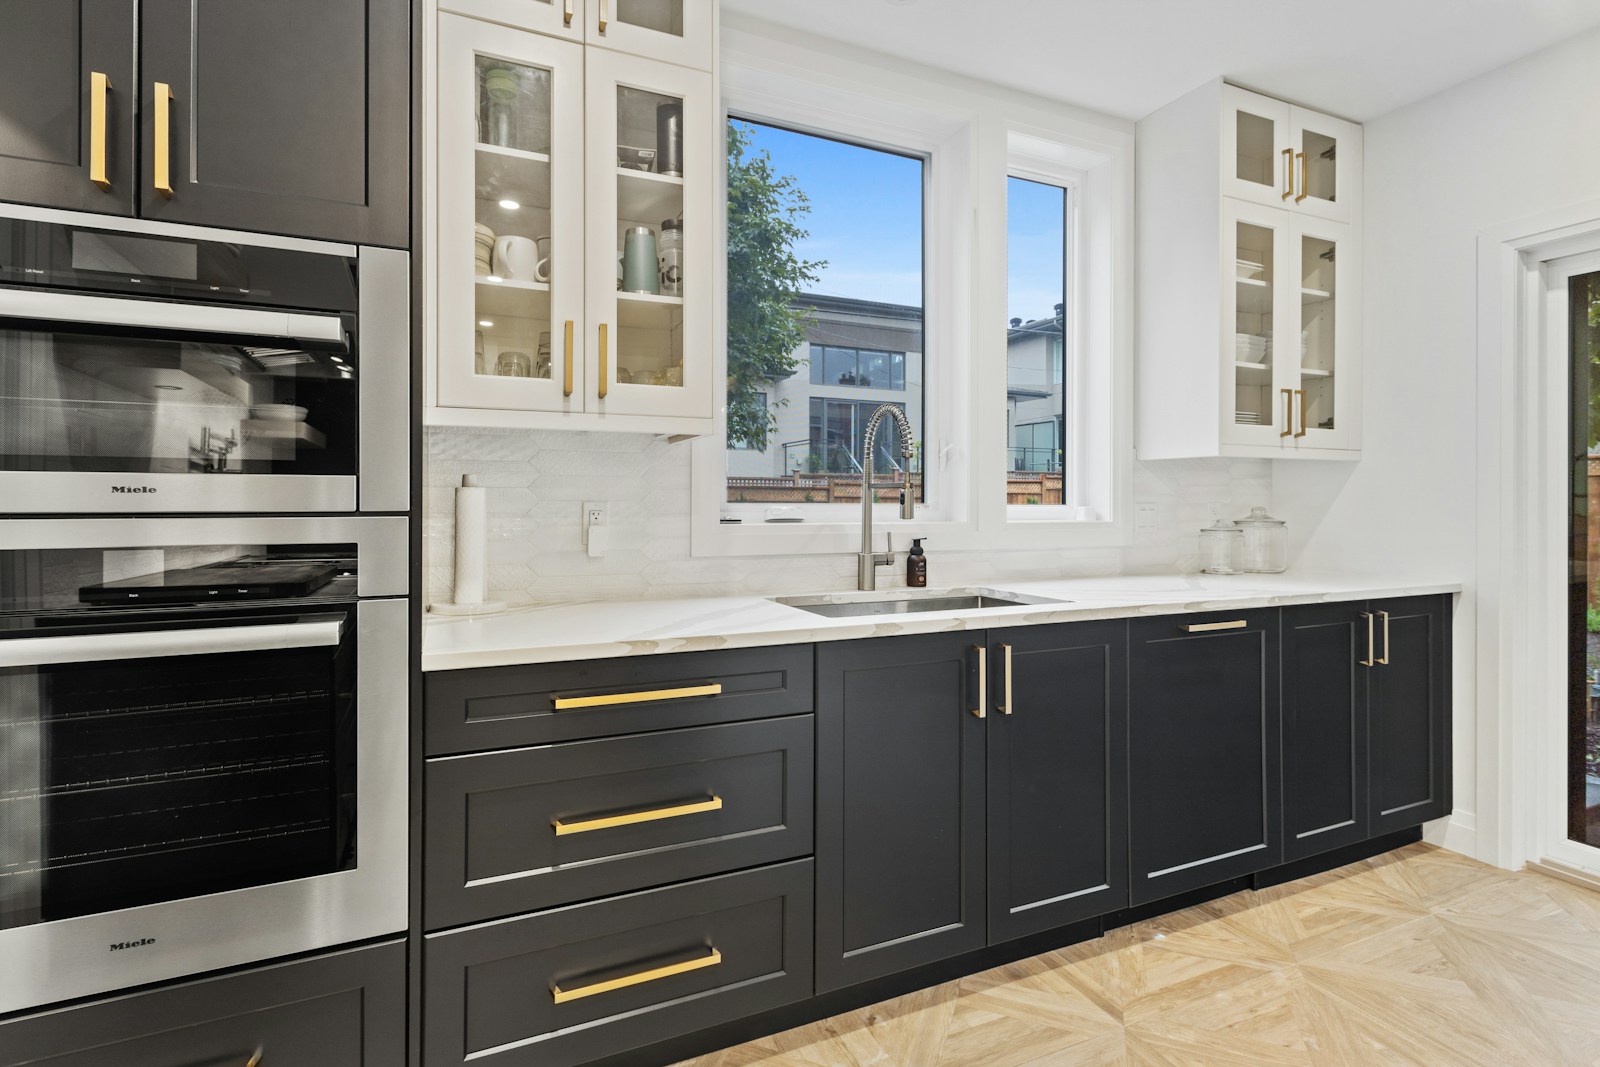 High Gloss Kitchen Cabinets: The Pros and Cons